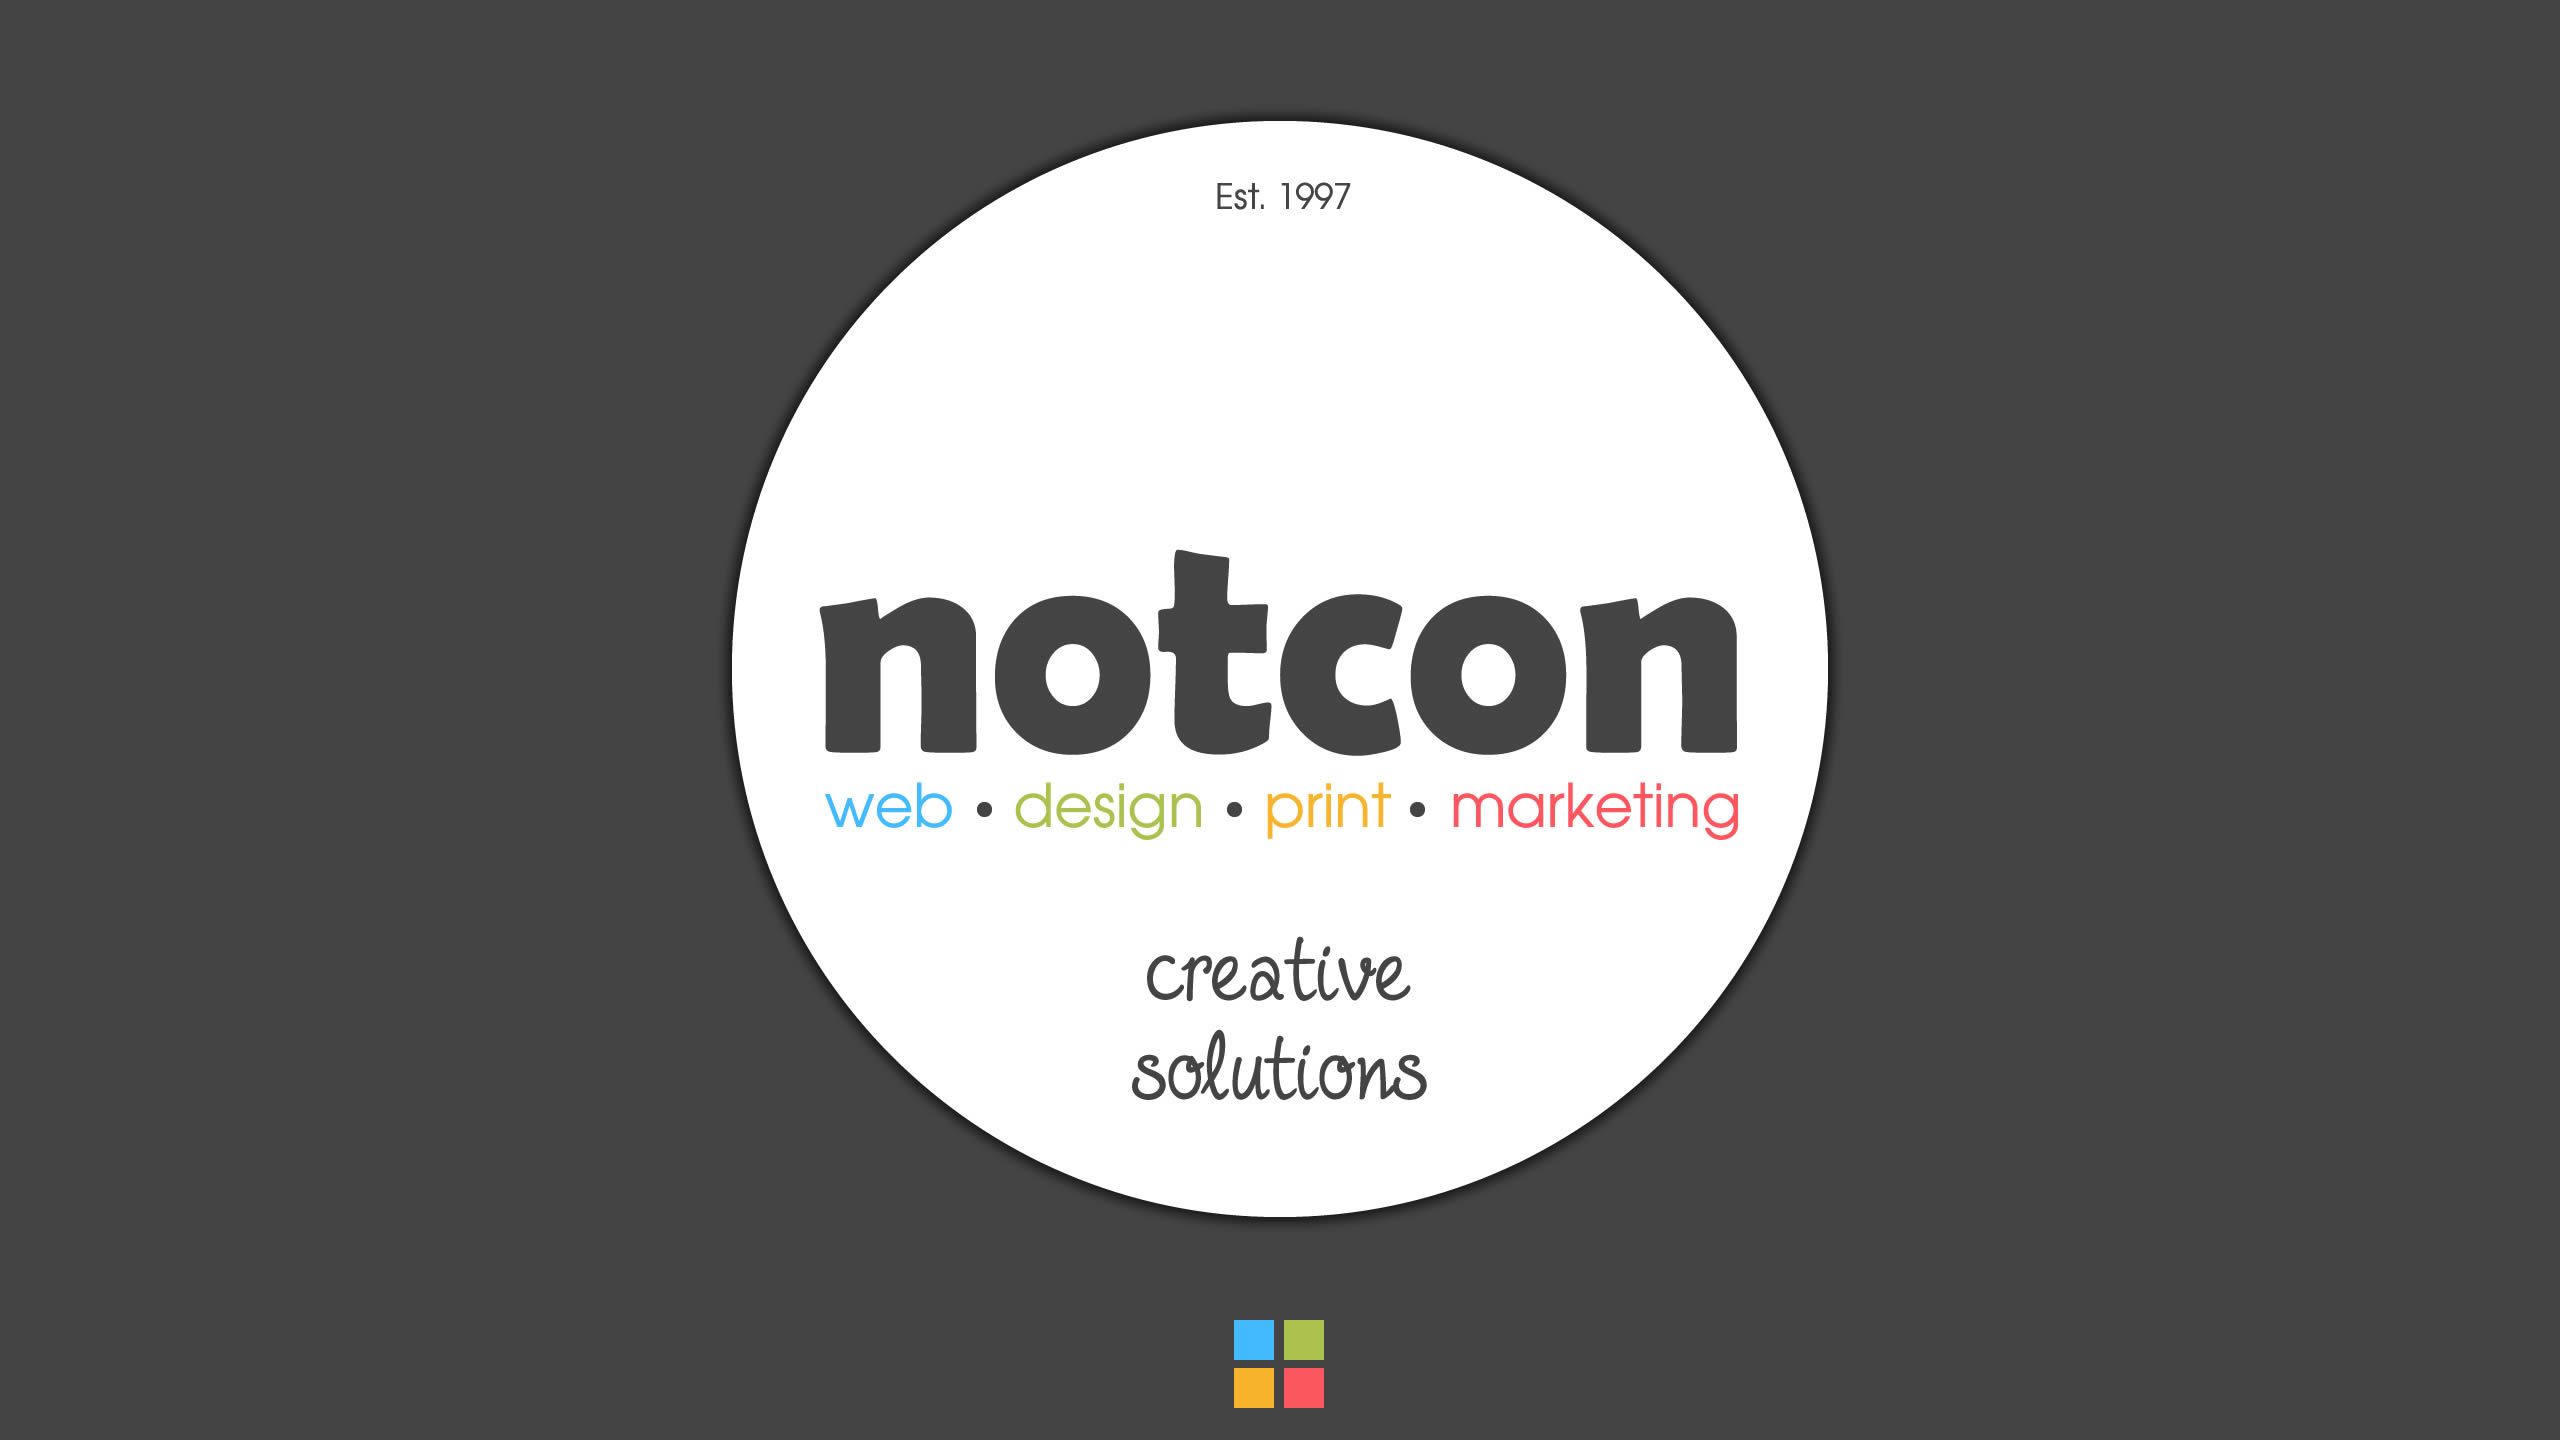 notcon - website designers, printers, graphic designers and online marketing firm